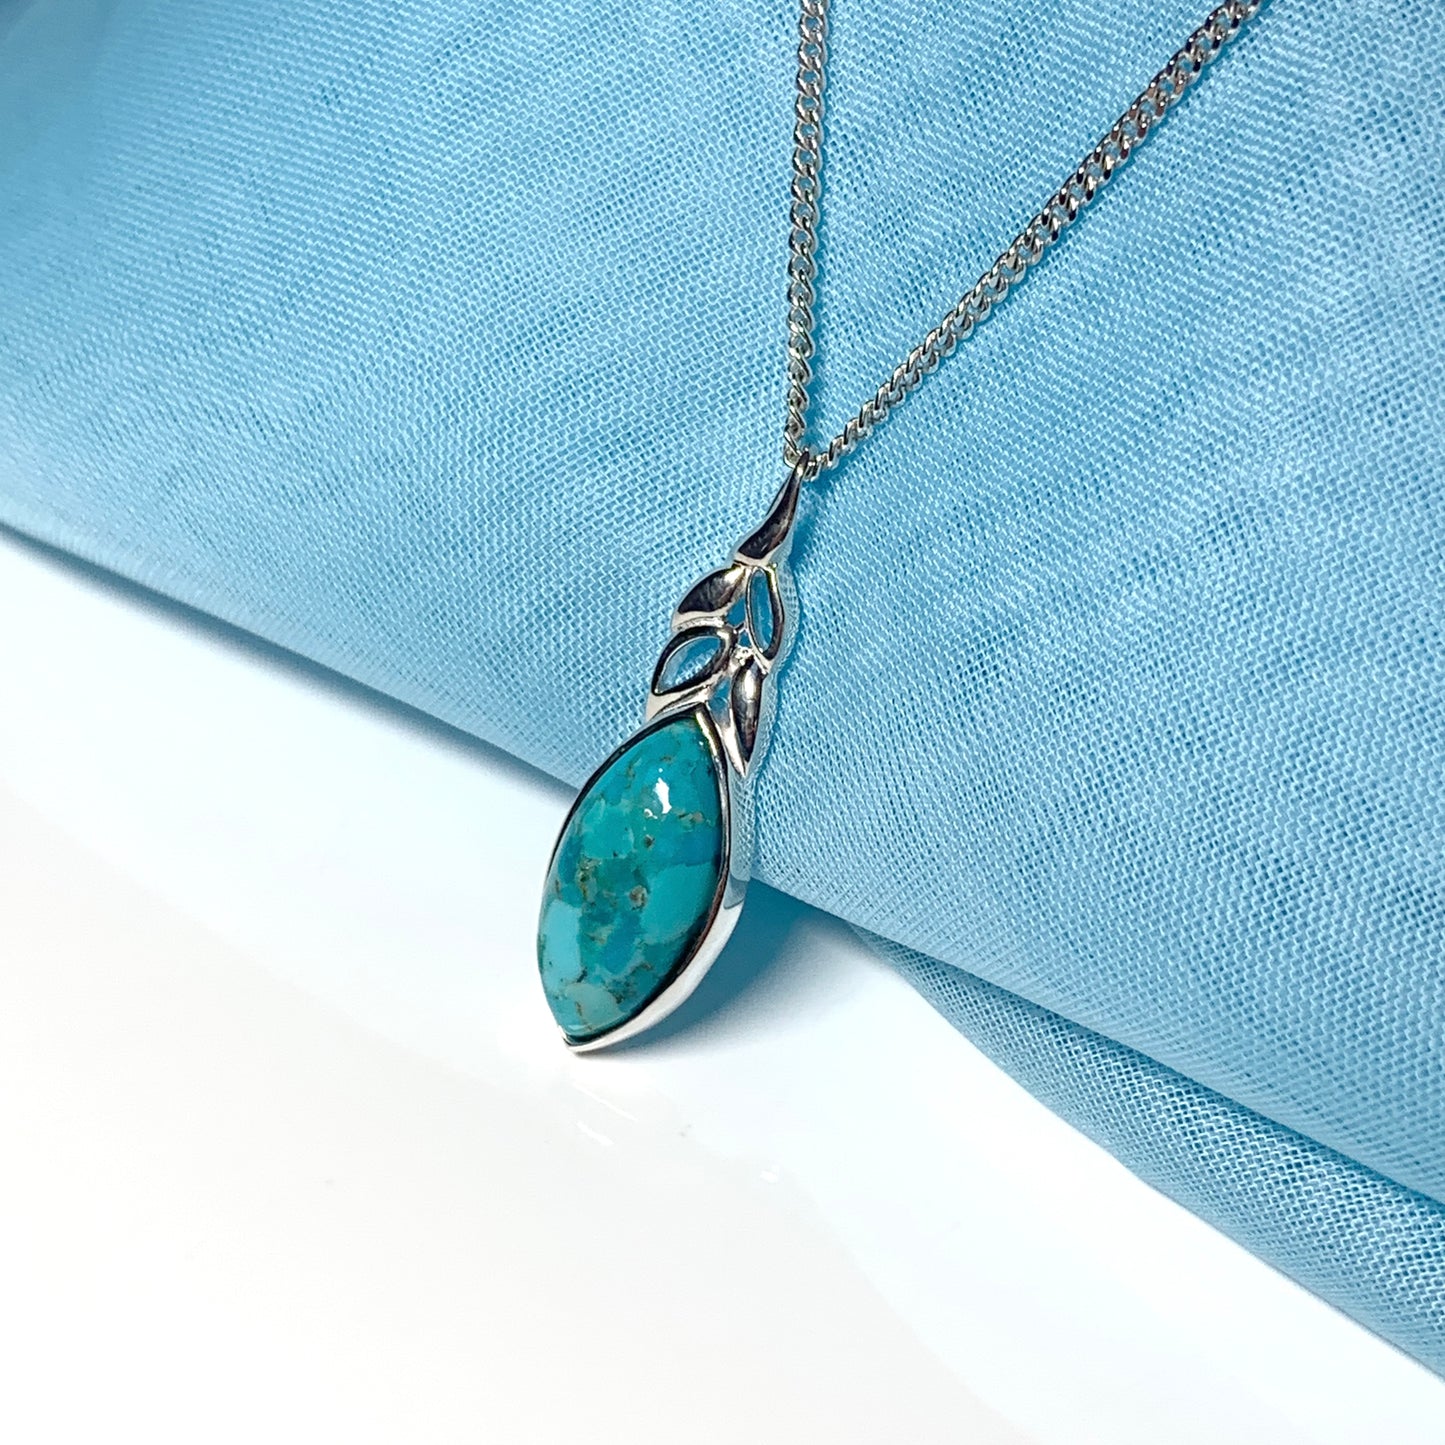 Turquoise pendant necklace marquise cut silver